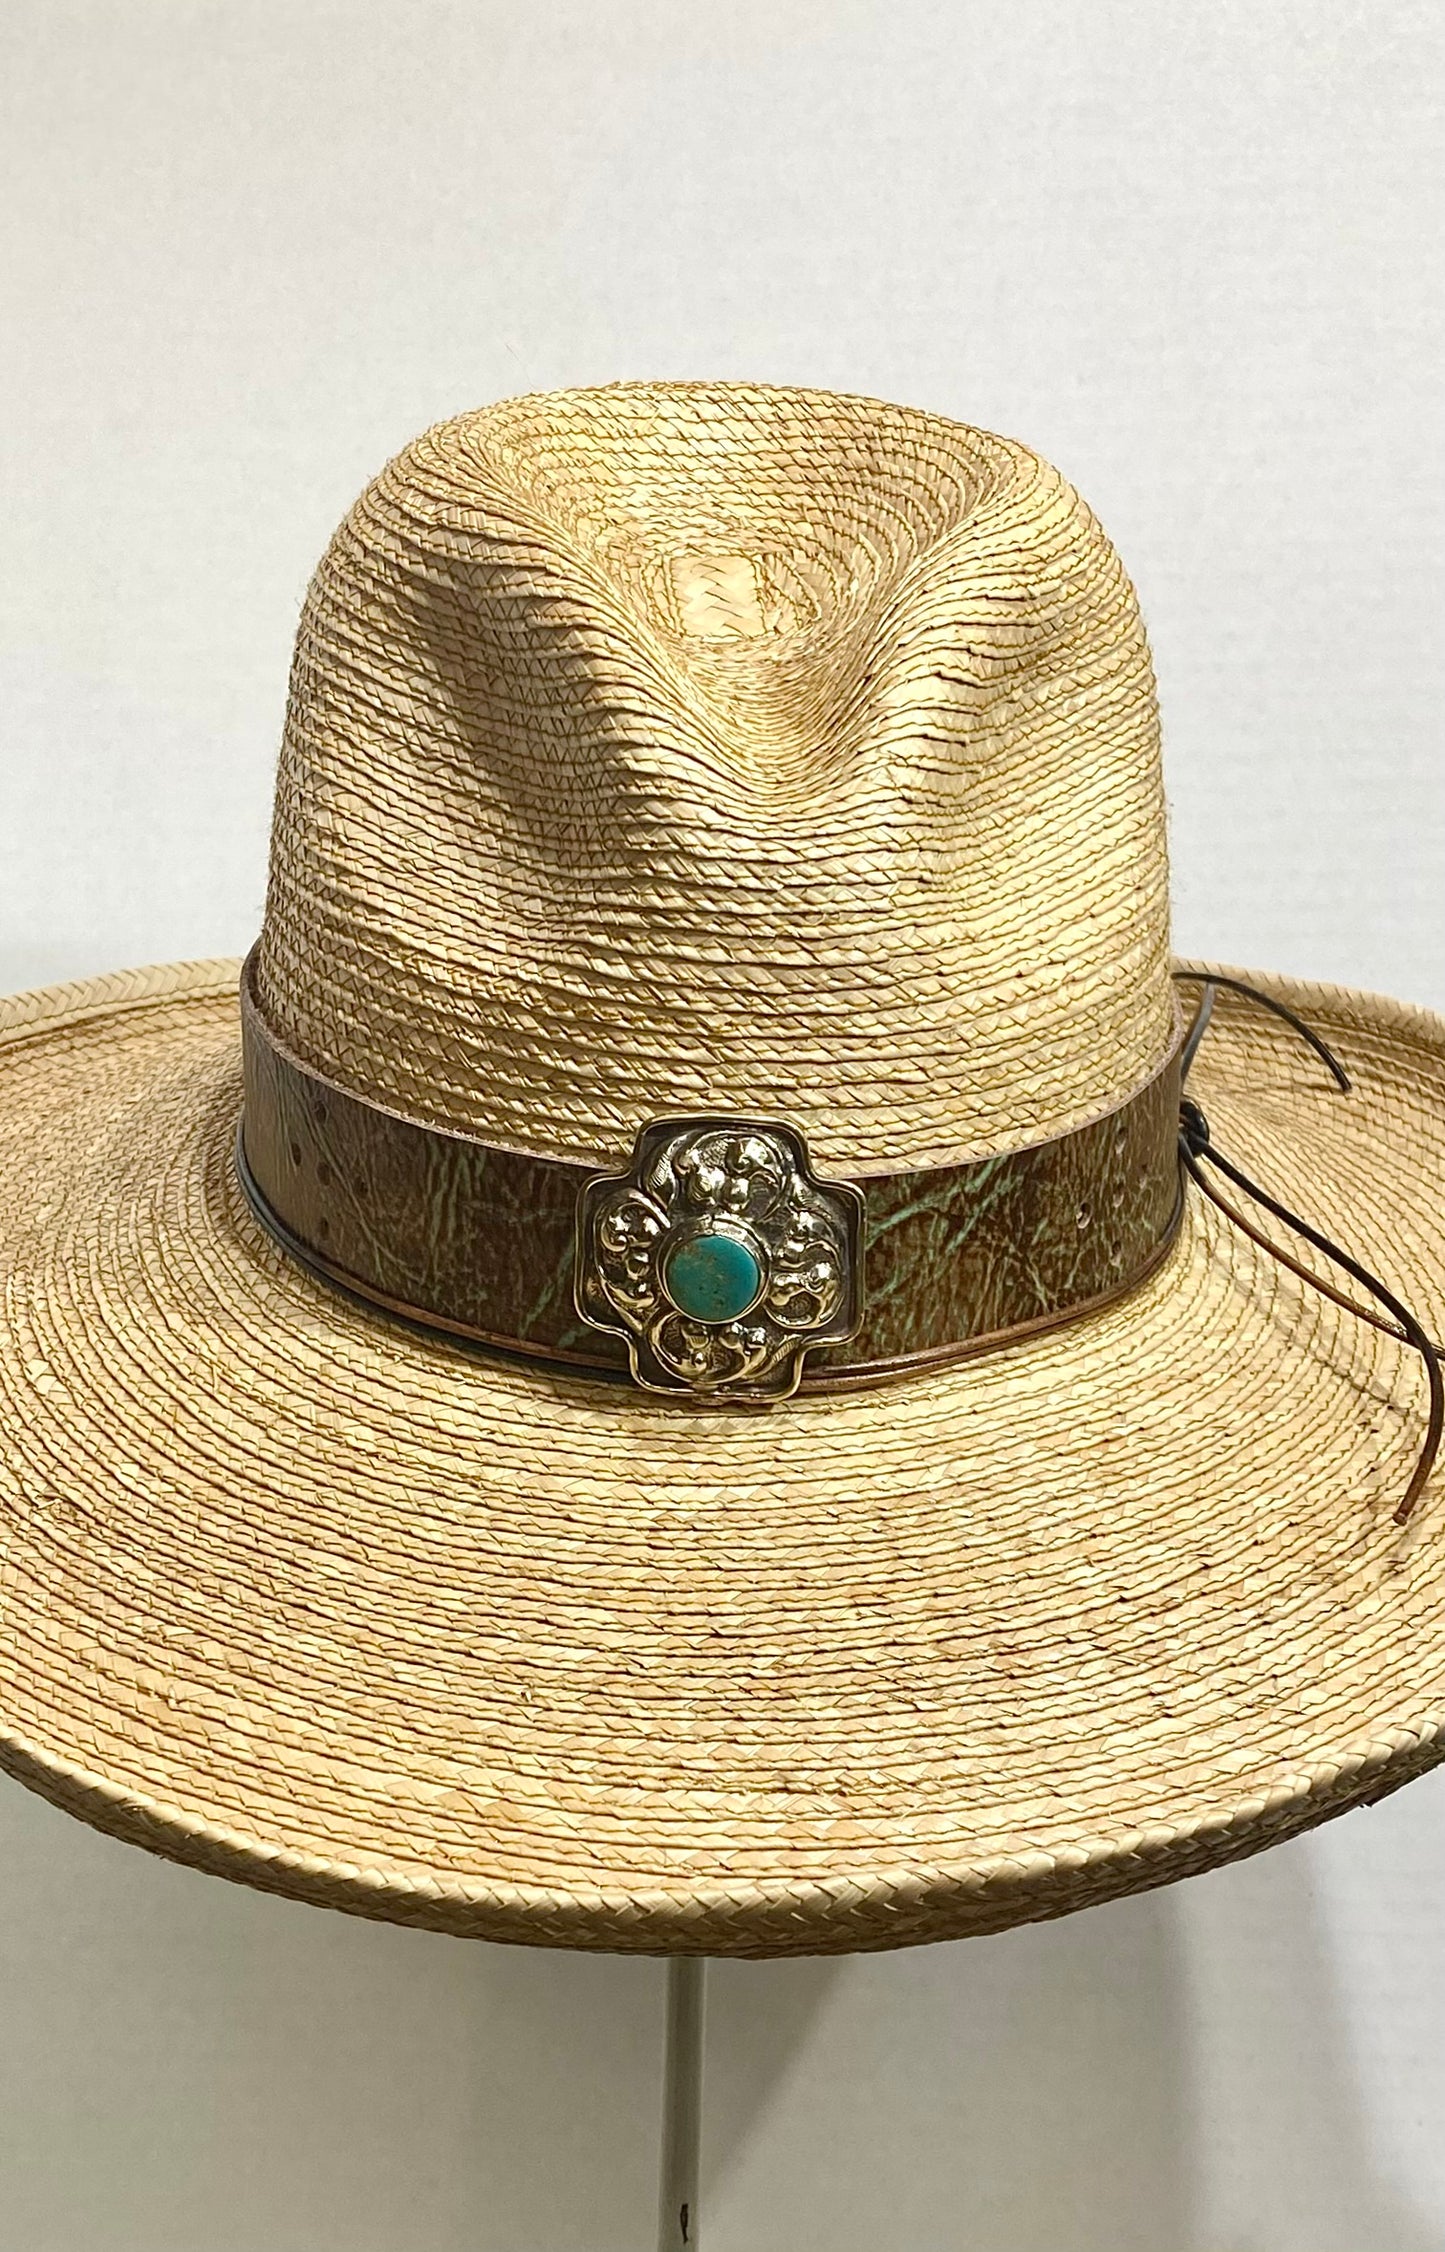 Distressed Leather & Turquoise Hatband